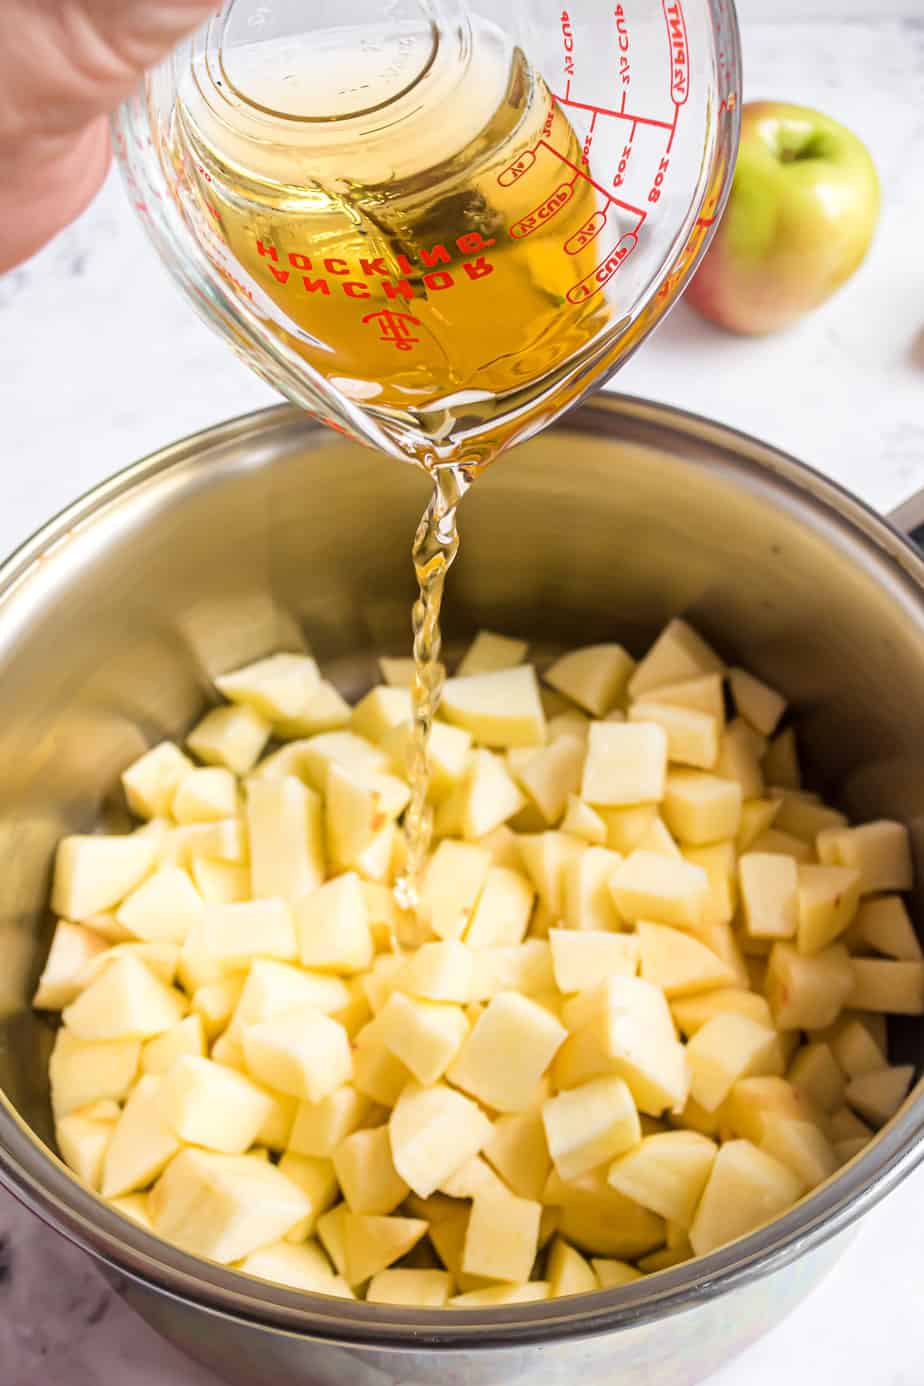 Apple juice being poured from a measuring cup into a pot full of diced apples.